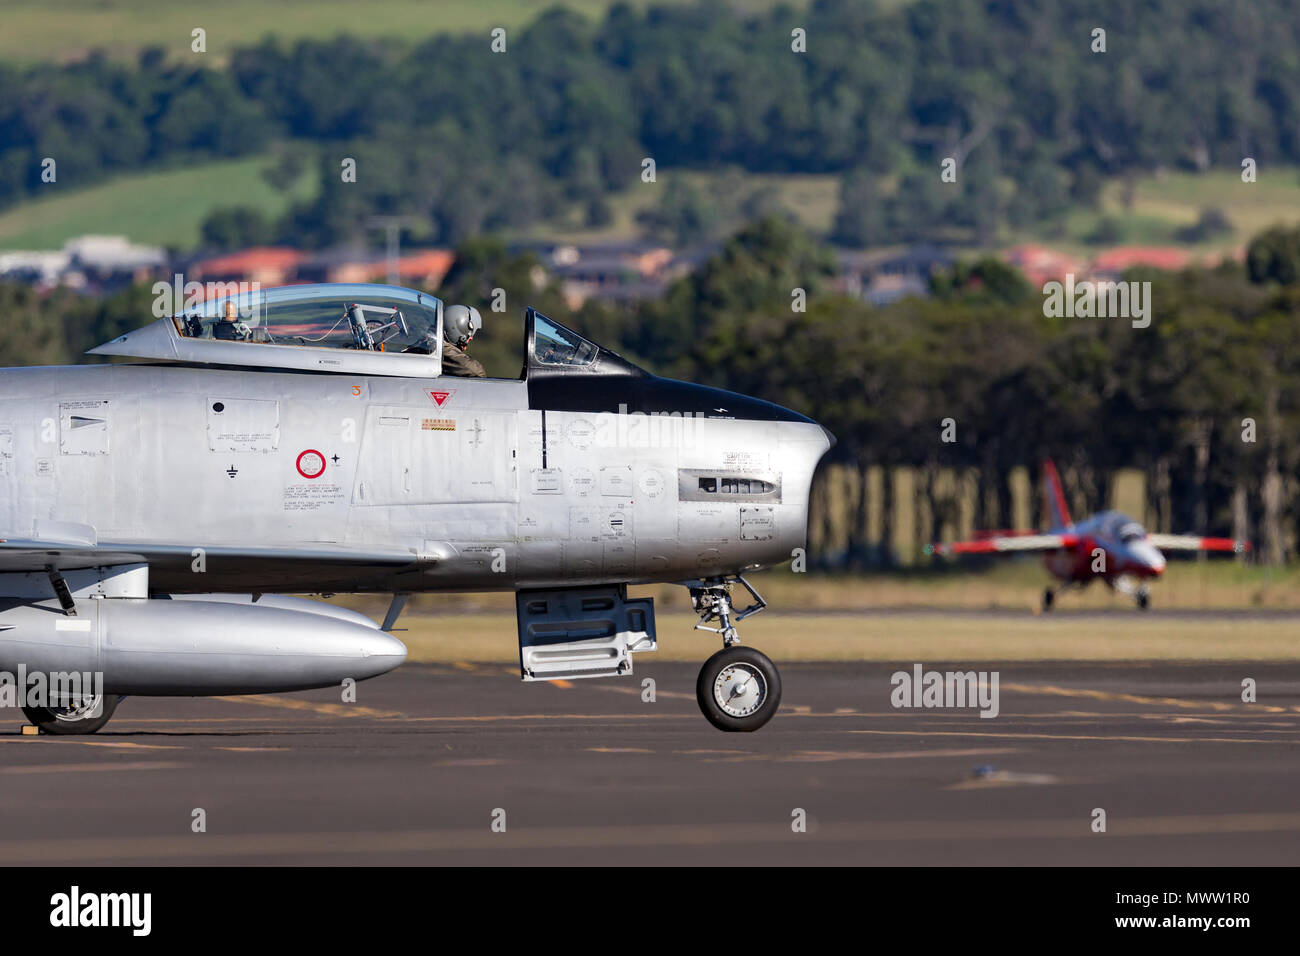 Former Royal Australian Air Force (RAAF) Commonwealth Aircraft Corporation CA-27 (North American F-86) Sabre jet aircraft. Stock Photo